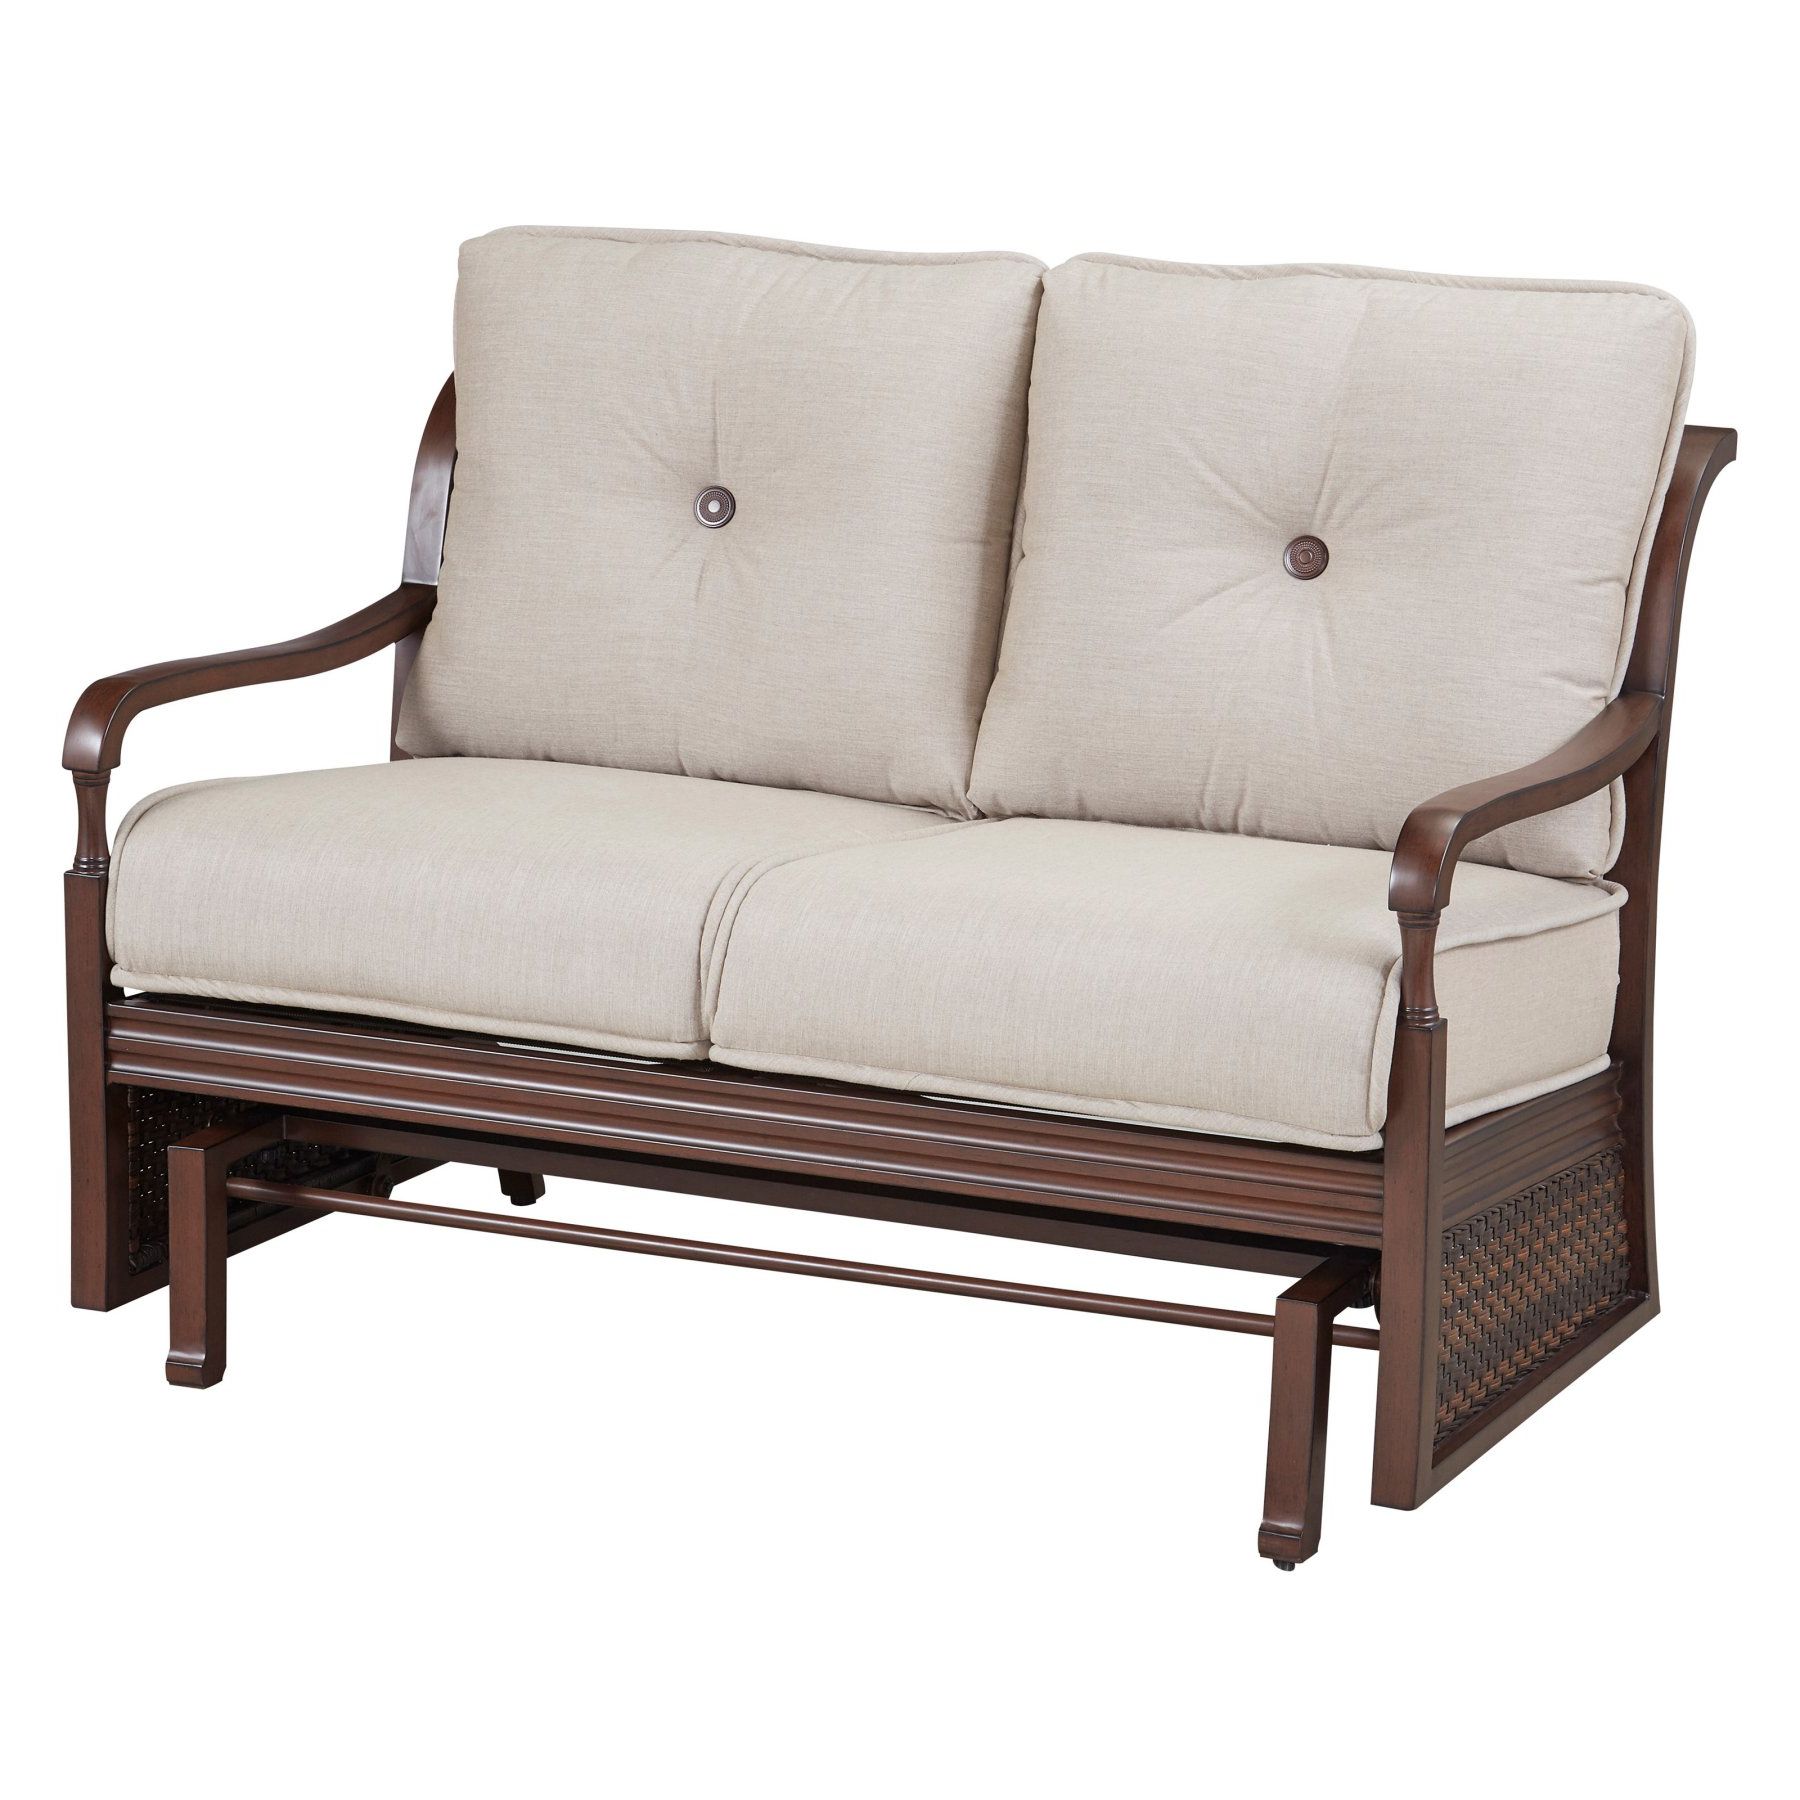 Outdoor Paula Deen Home River House Patio Loveseat Glider Intended For Popular Outdoor Loveseat Gliders With Cushion (View 16 of 30)